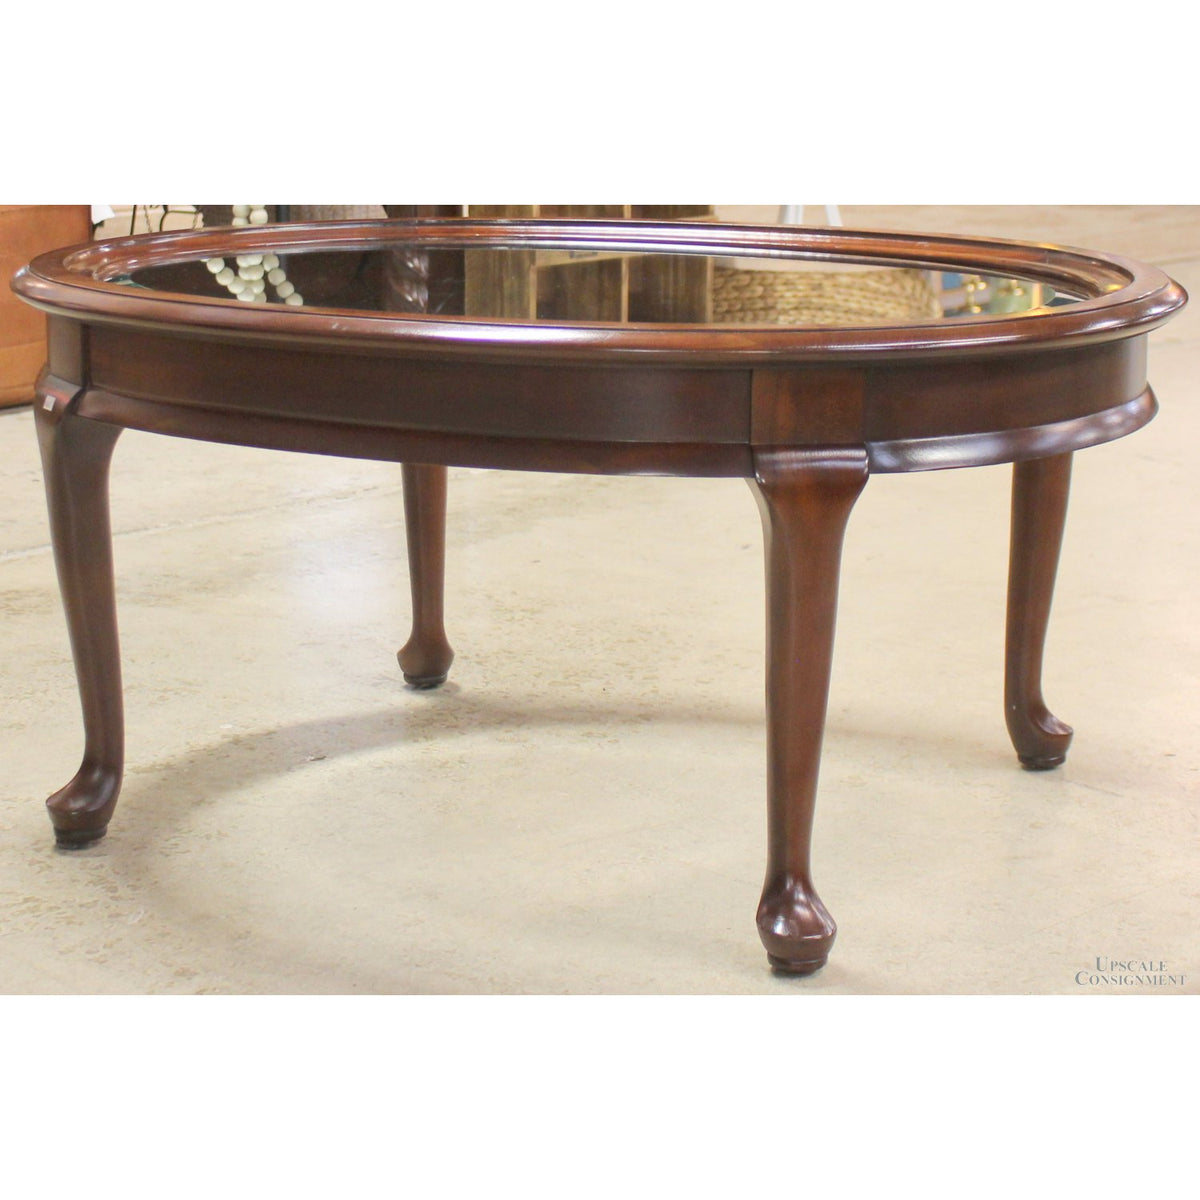 Glass Insert Oval Coffee Table